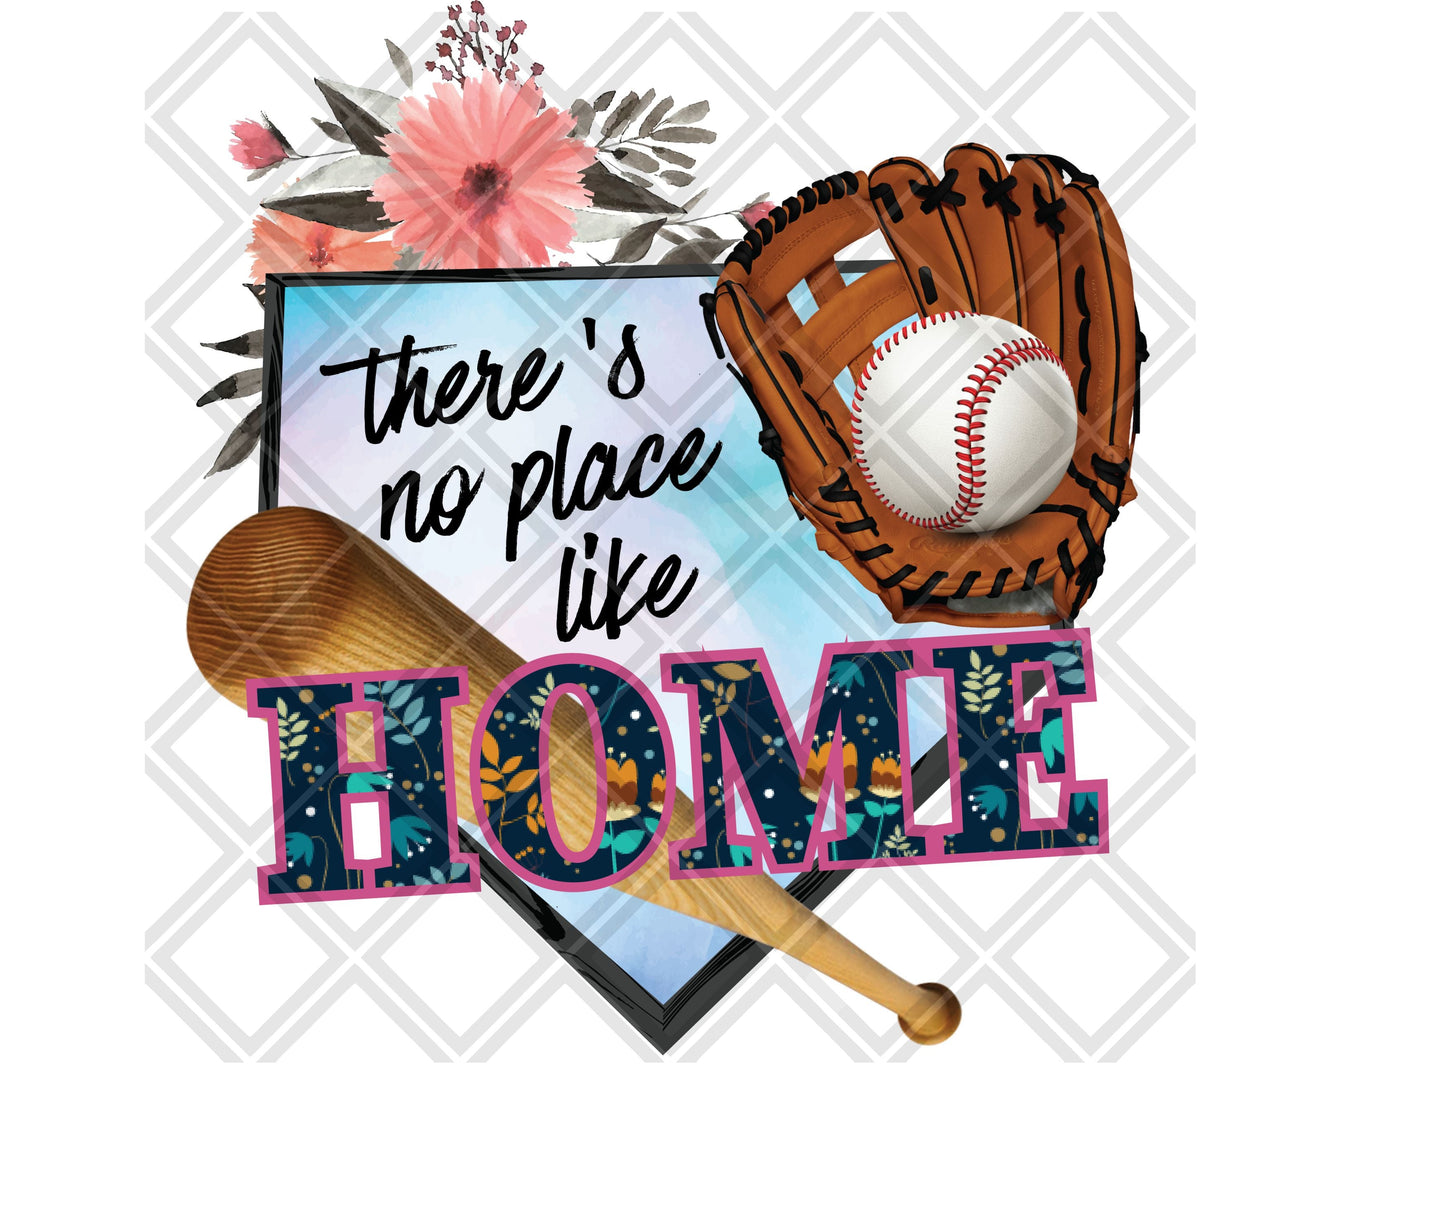 THERES NO PLACE LIKE HOME FLOWERS Digital Download Instand Download